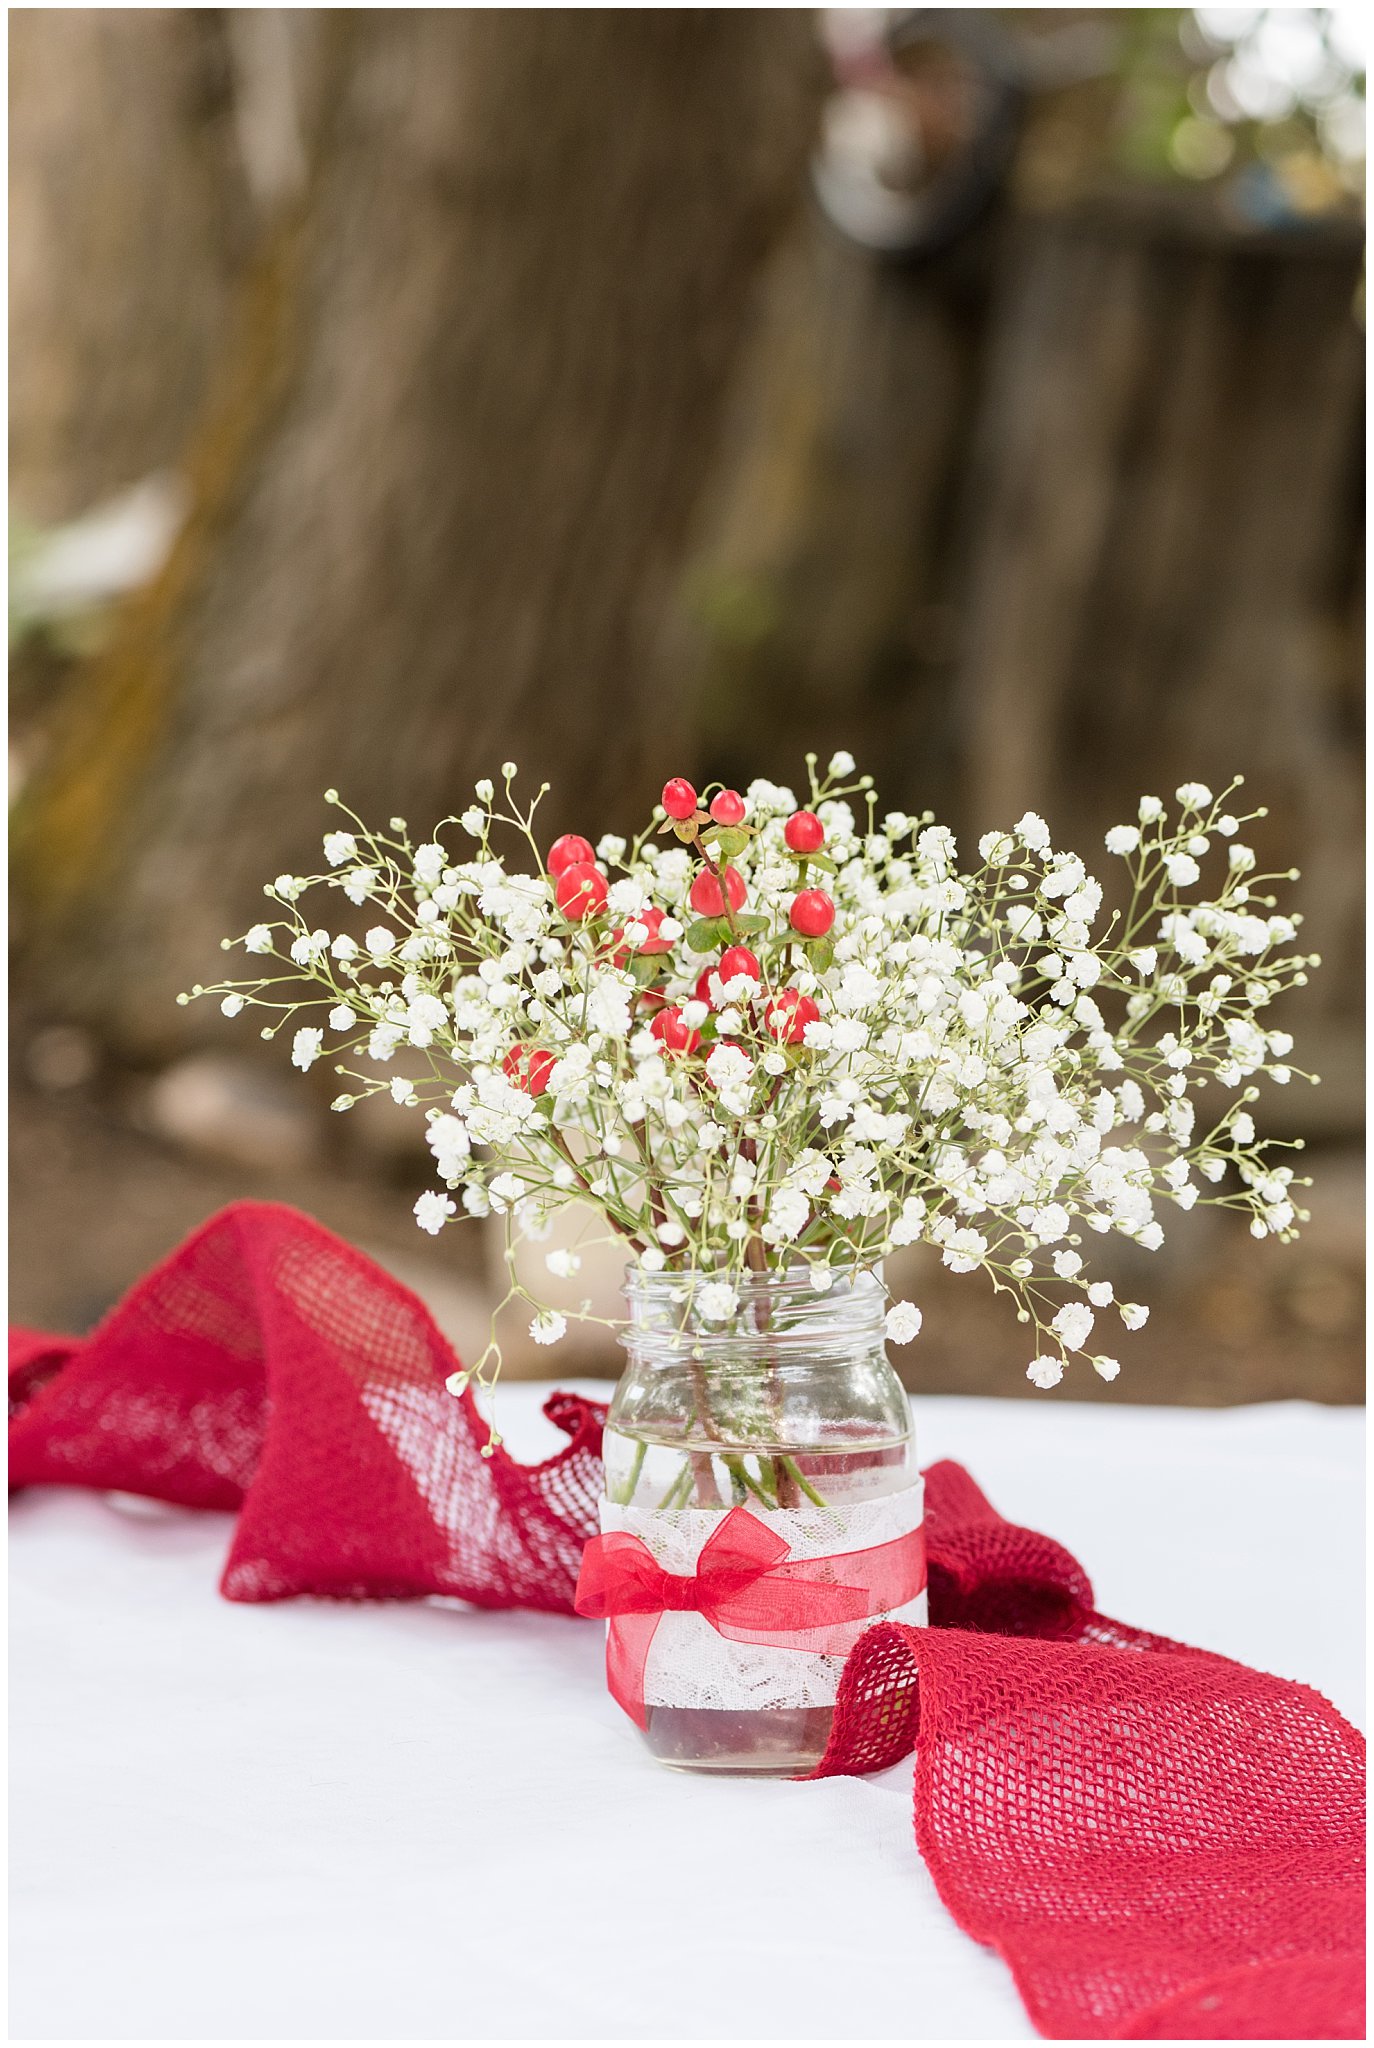 Floral table center pieces at wedding reception | Red and Grey wedding | Davis County Outdoor Wedding | Jessie and Dallin Photography